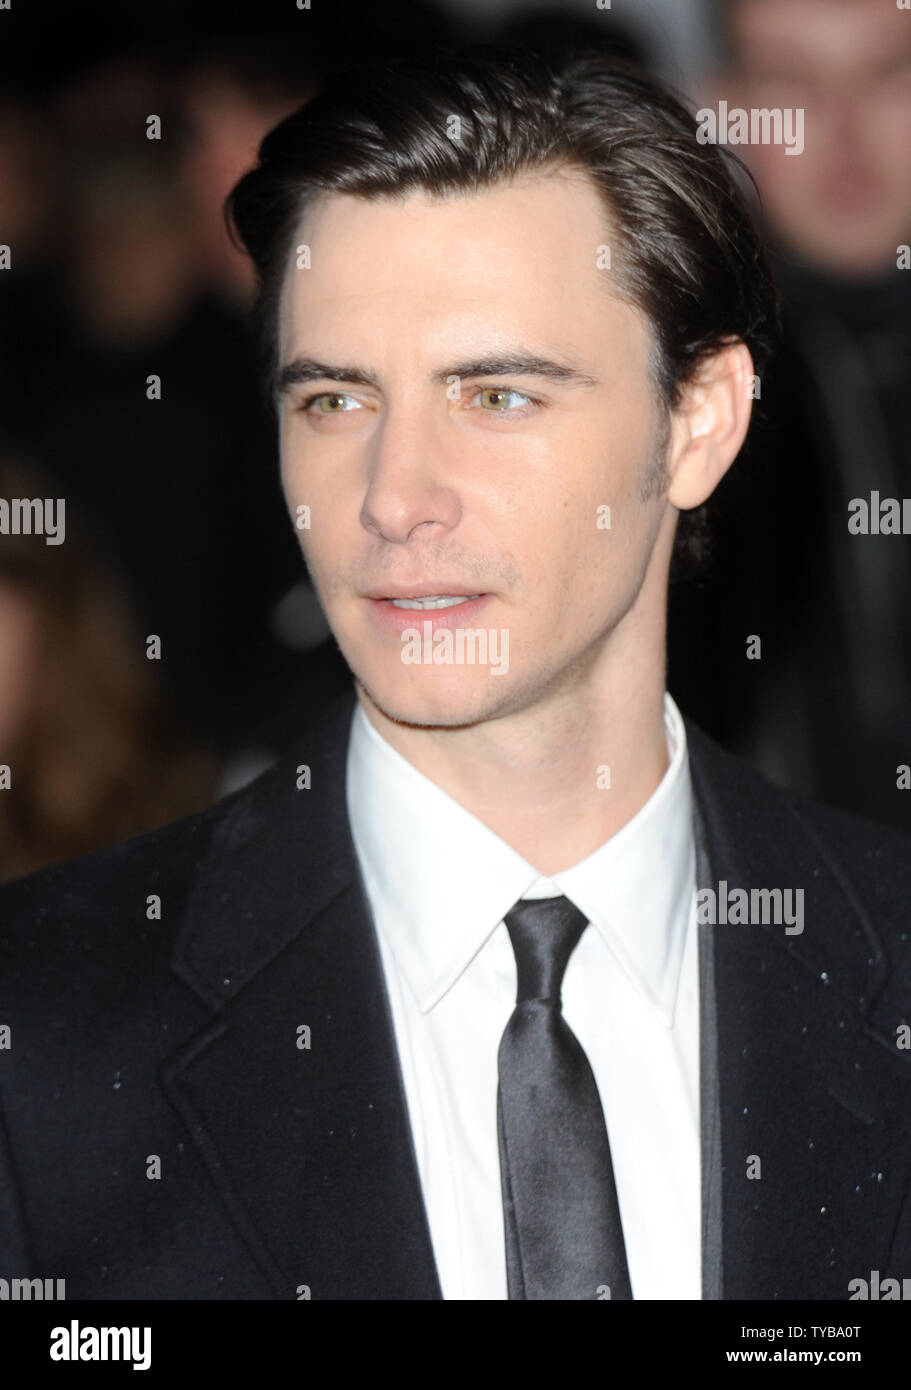 British actor Harry Lloyd attends the premiere of "The Iron Lady" at BFI  South Bank in London on January 4, 2012. UPI/Rune Hellestad Stock Photo -  Alamy